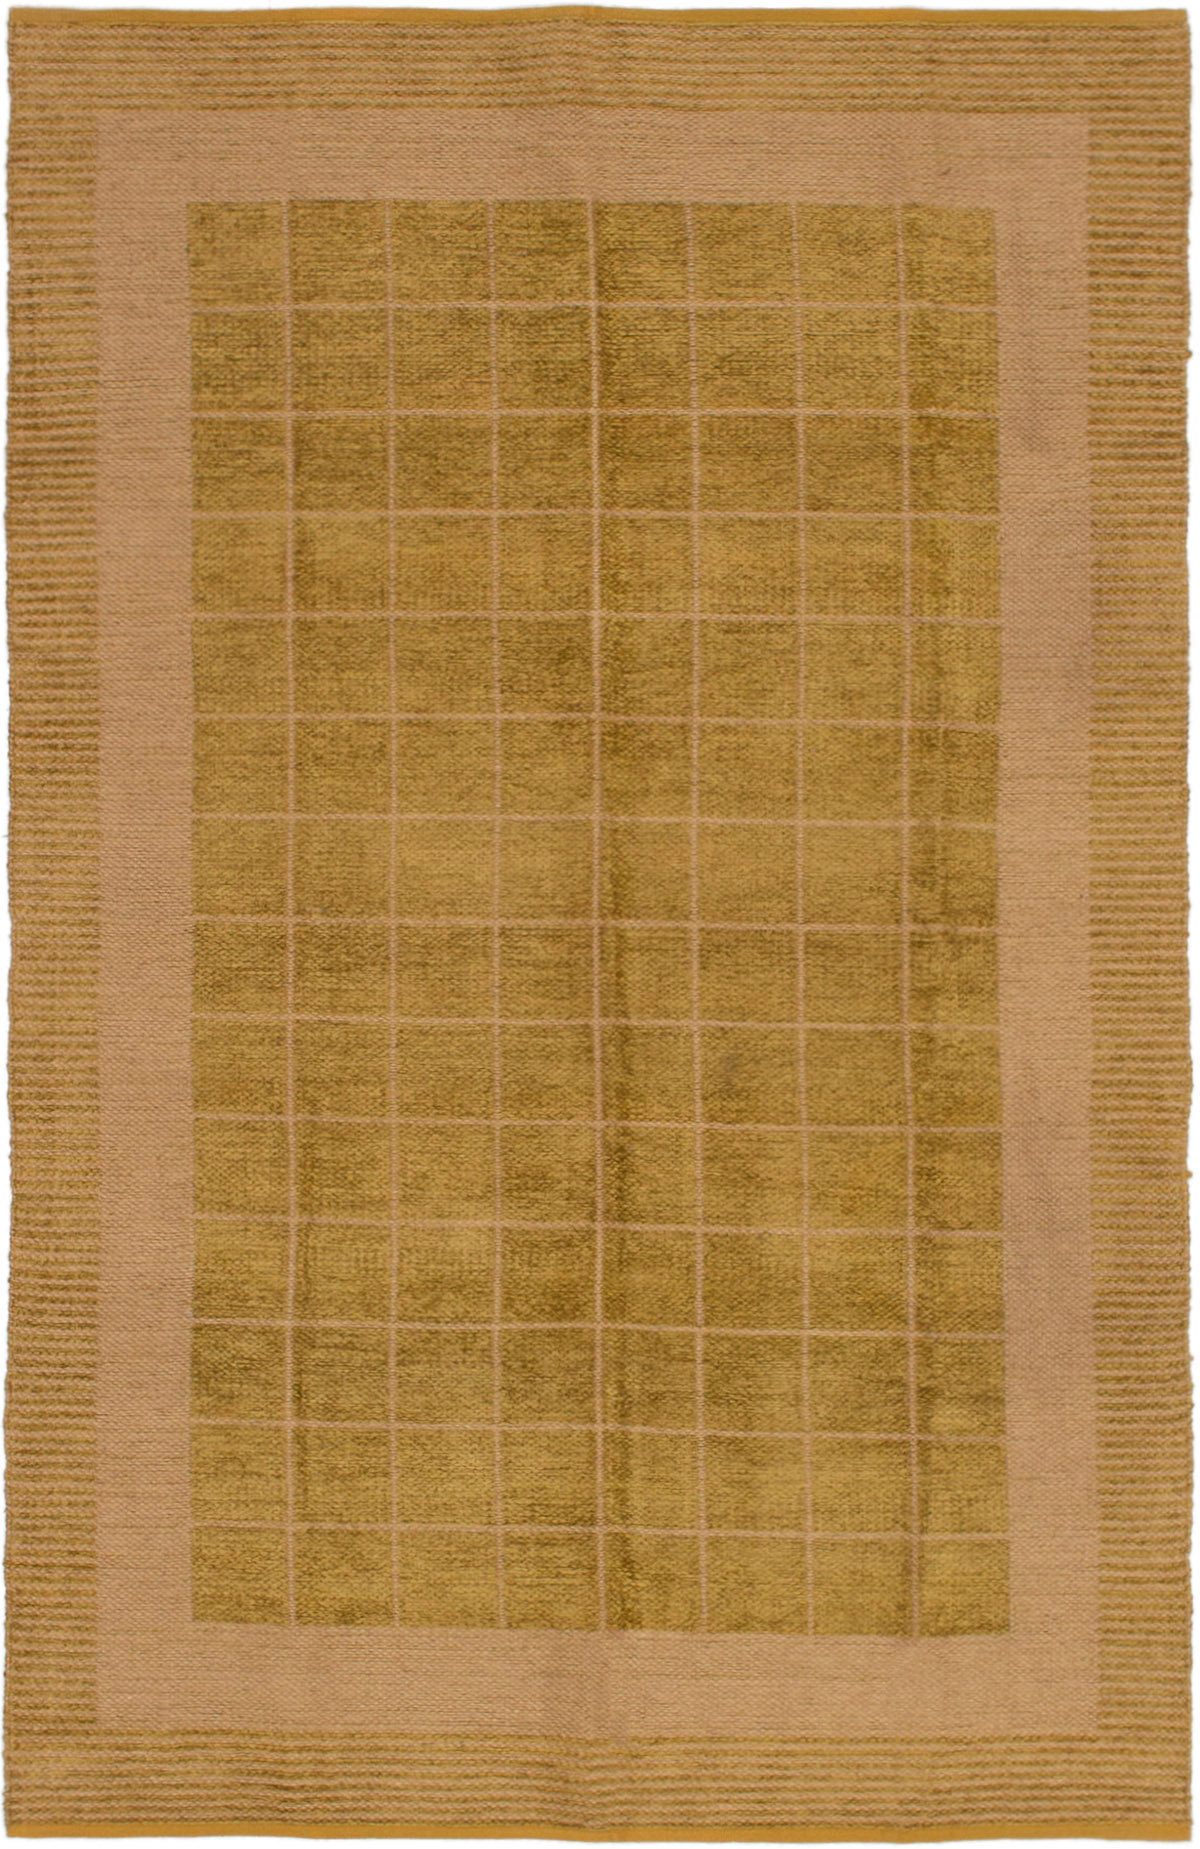 Hand woven Gaia dhurrie Olive Chenille Dhurrie 4'11" x 7'7" Size: 4'11" x 7'7"  